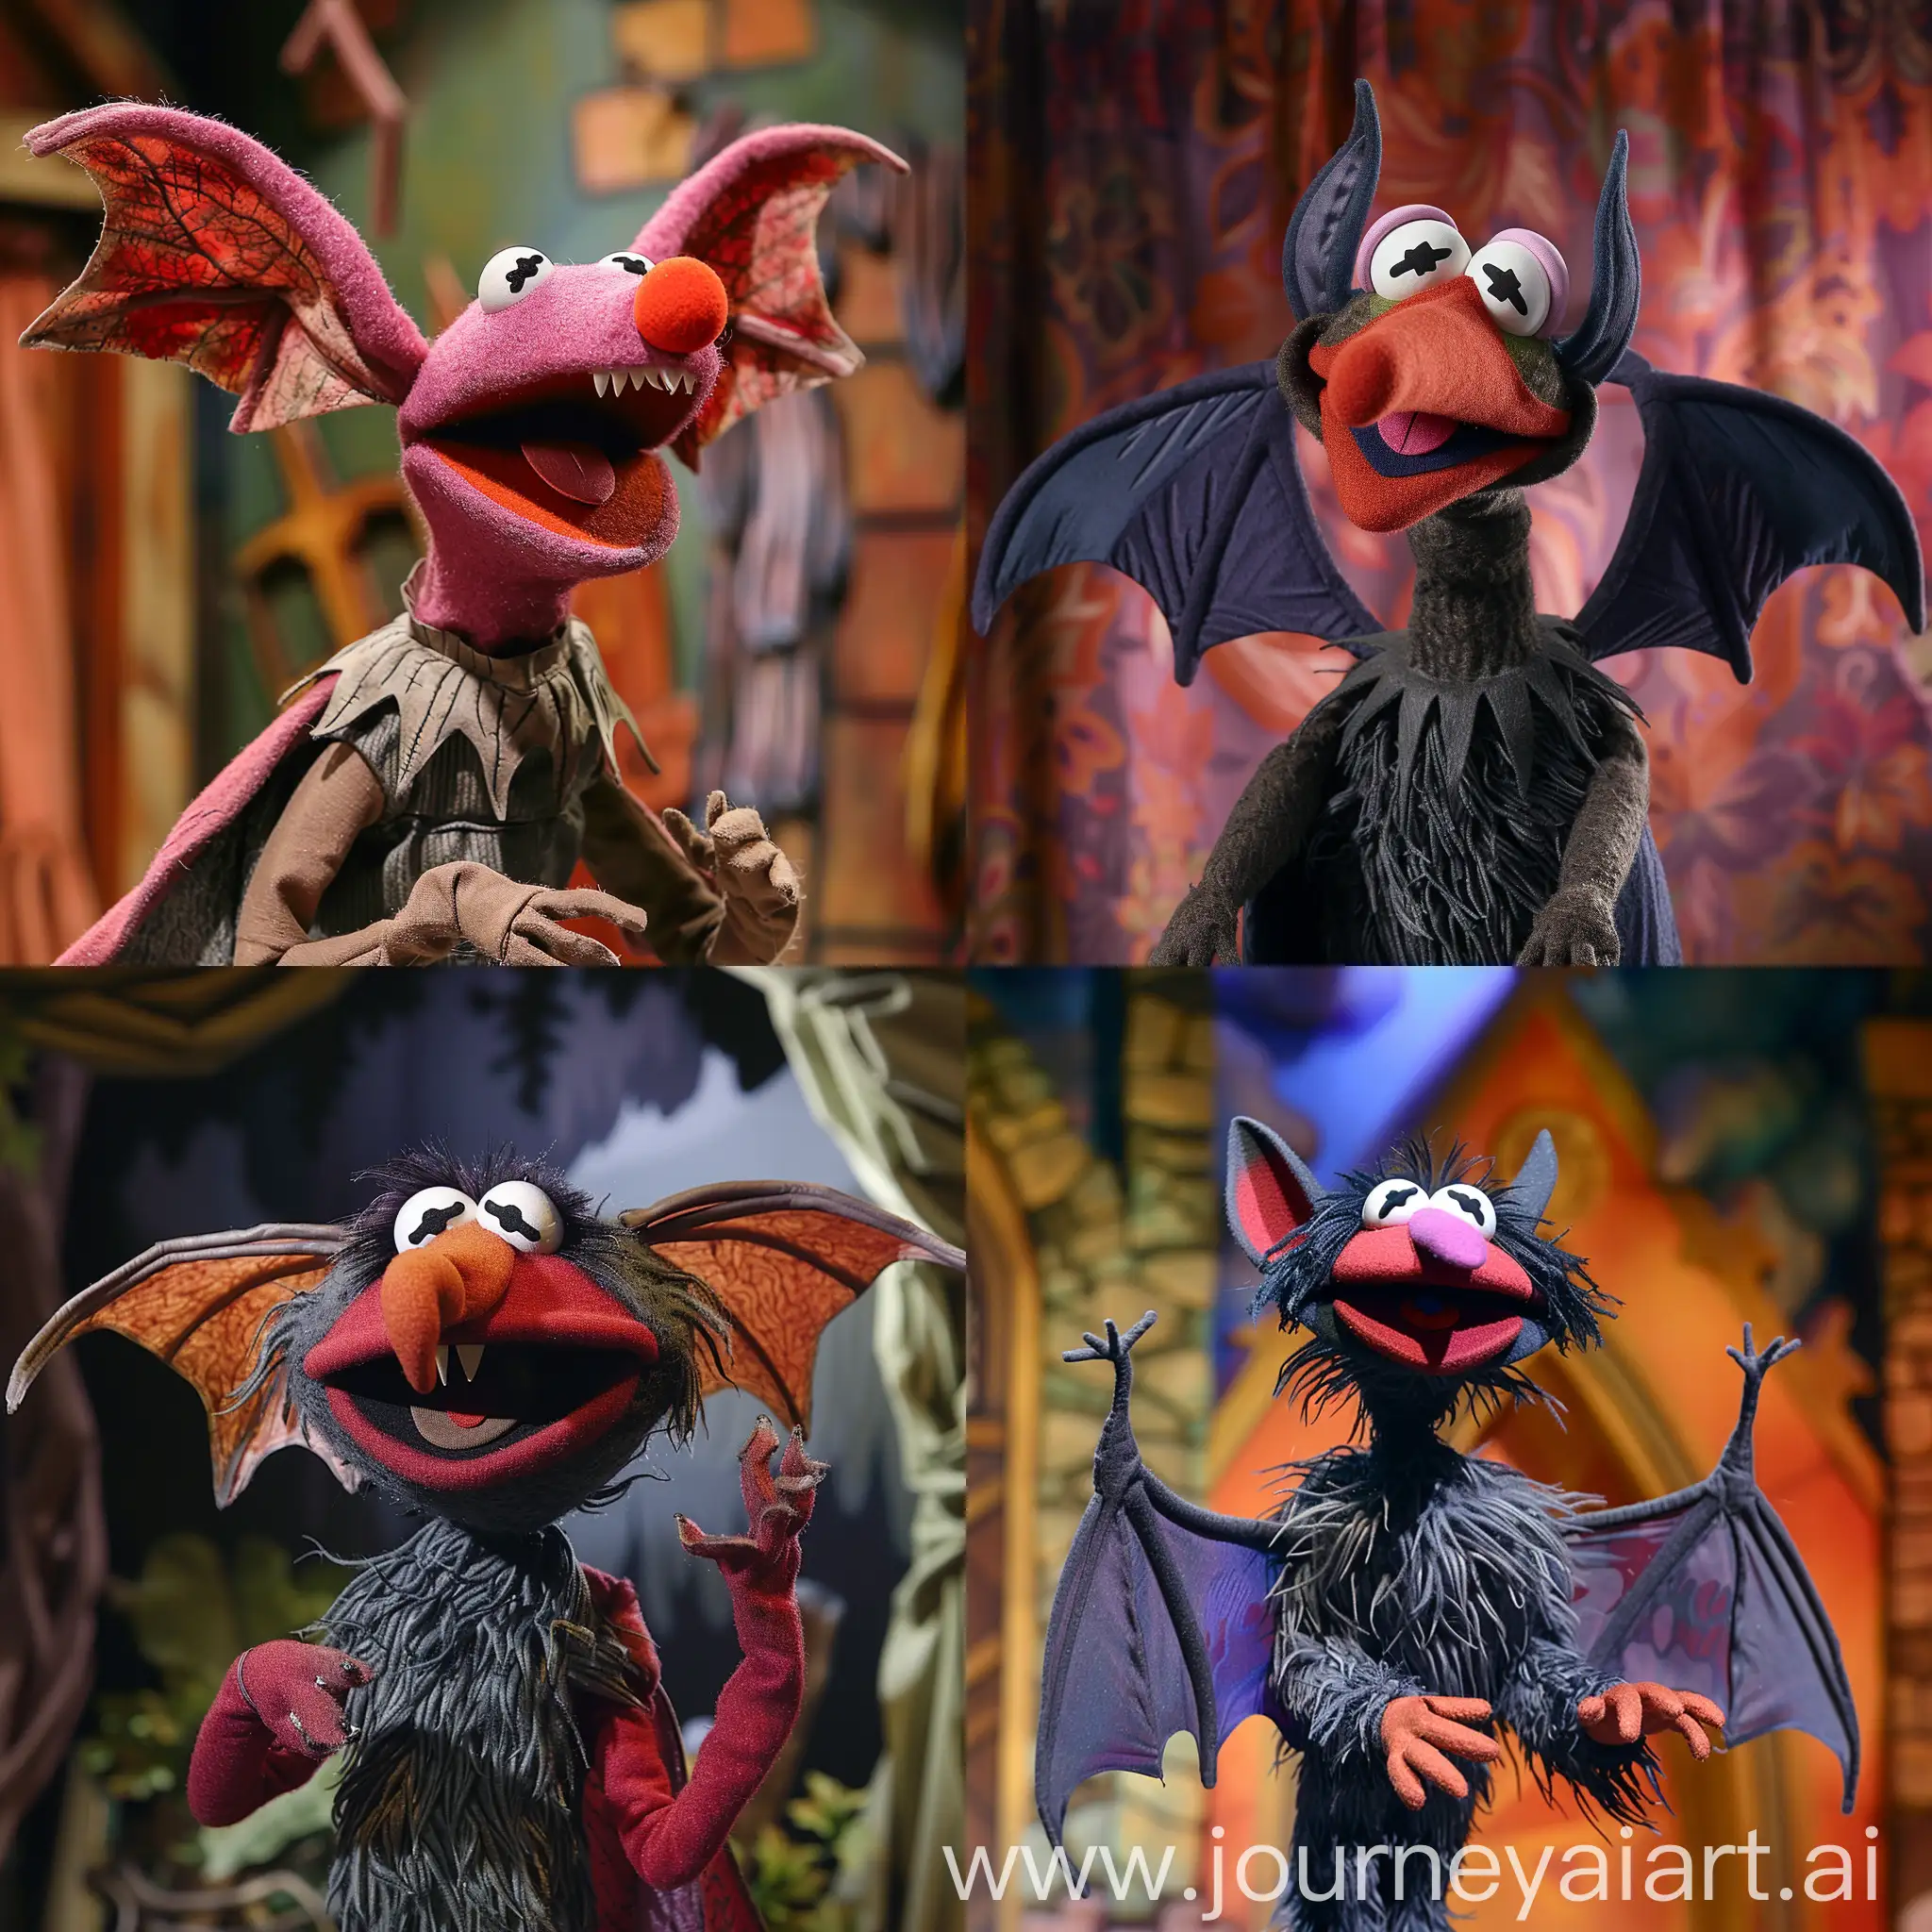 Rouge-the-Bat-Muppet-Playful-and-Vibrant-Character-Portrait